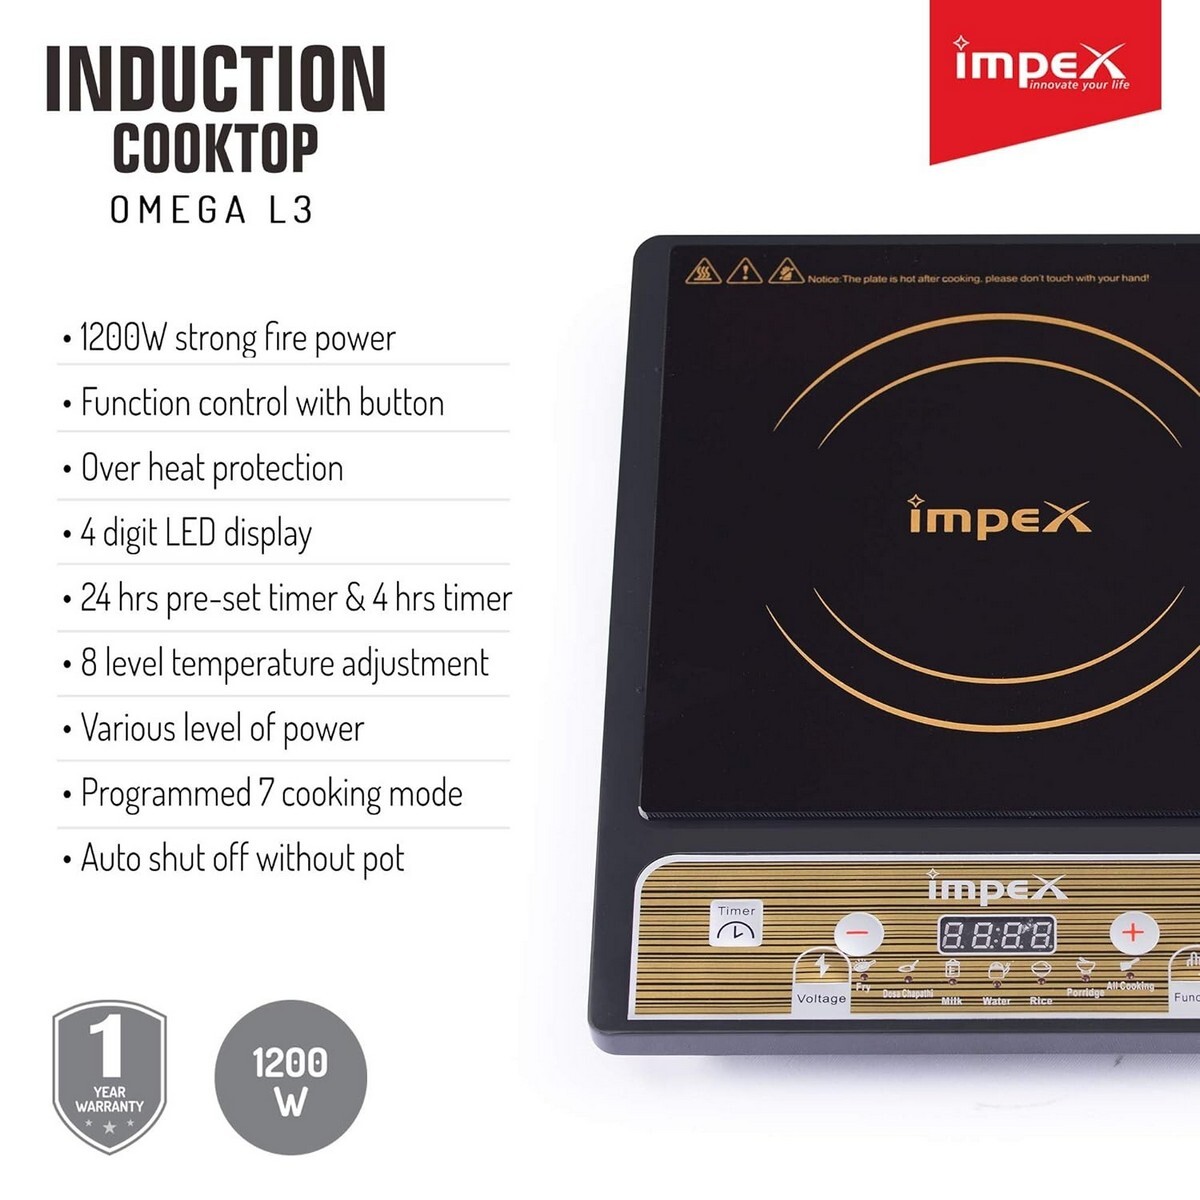 Impex Induction Cooktop Omega L3